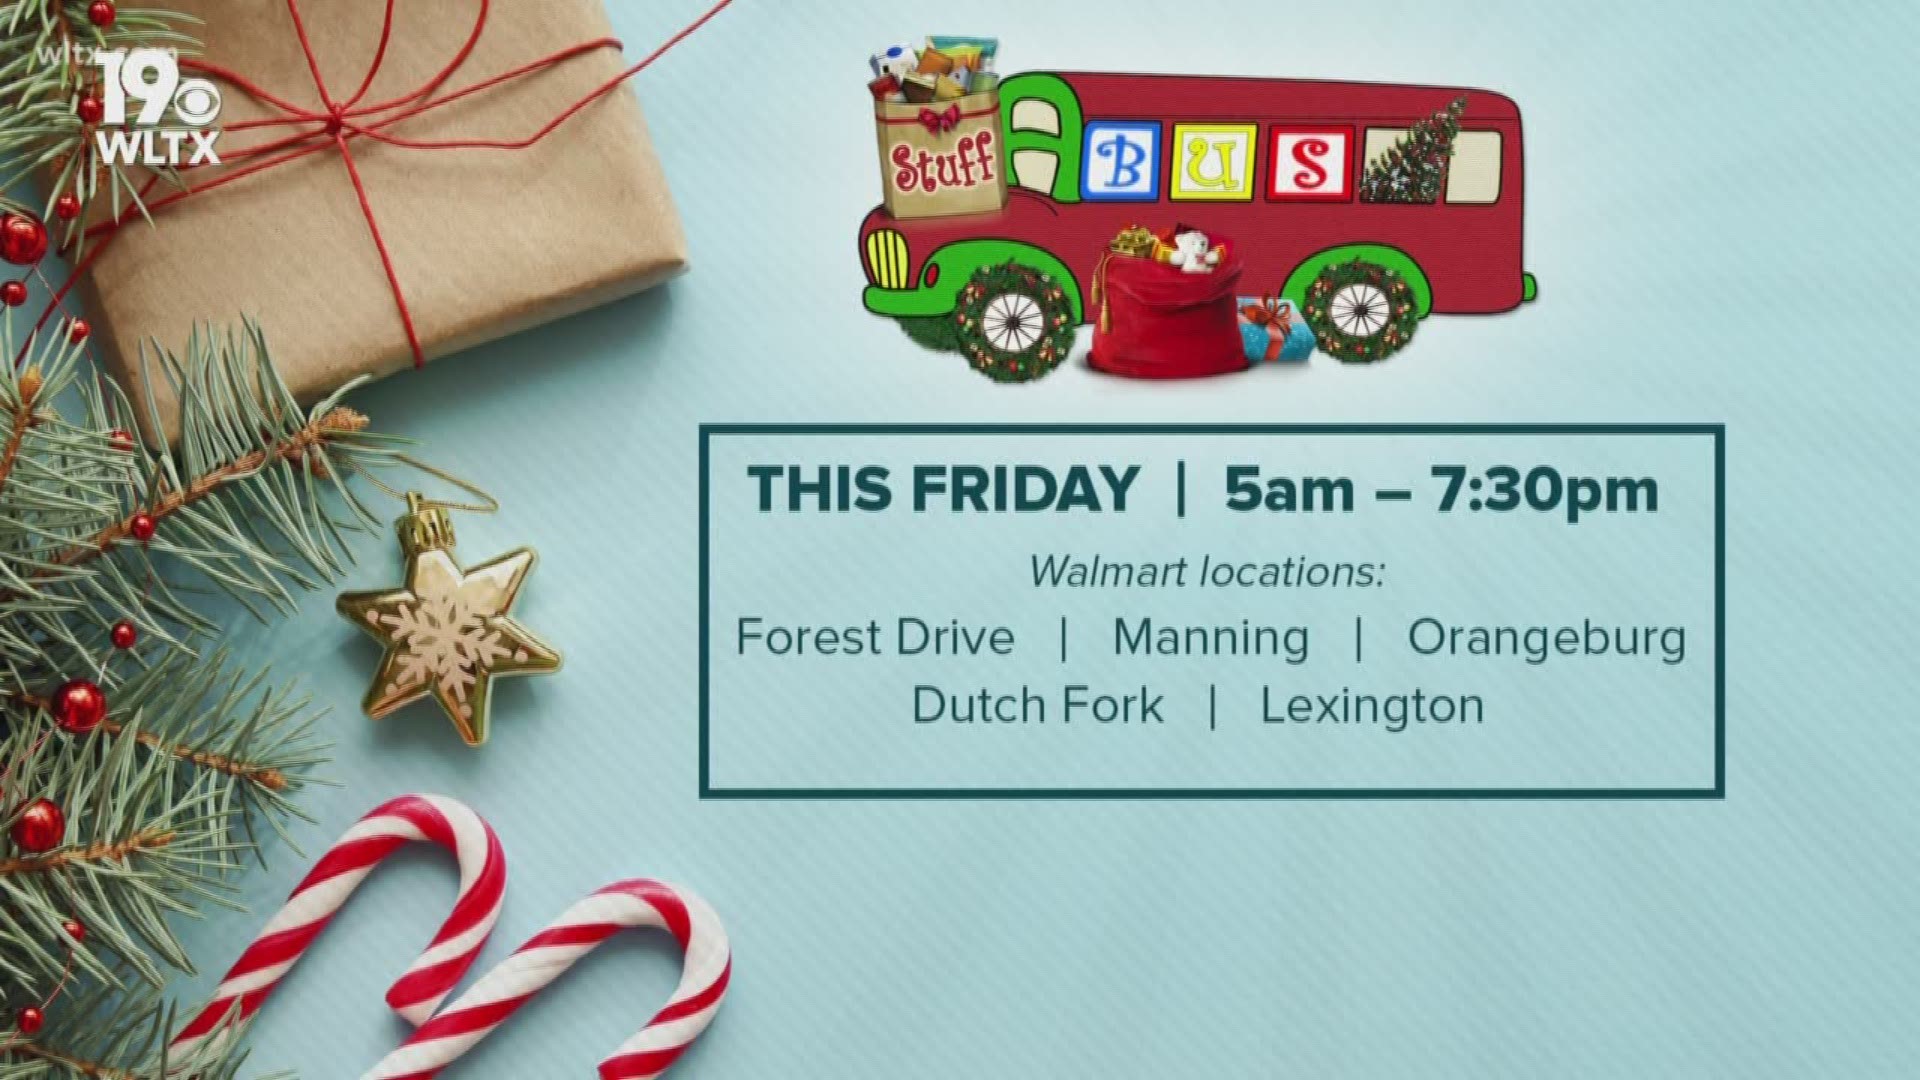 WLTX's annual Stuff-a-Bus campaign to get toys for kids begins Friday at Midlands area Walmart stores.